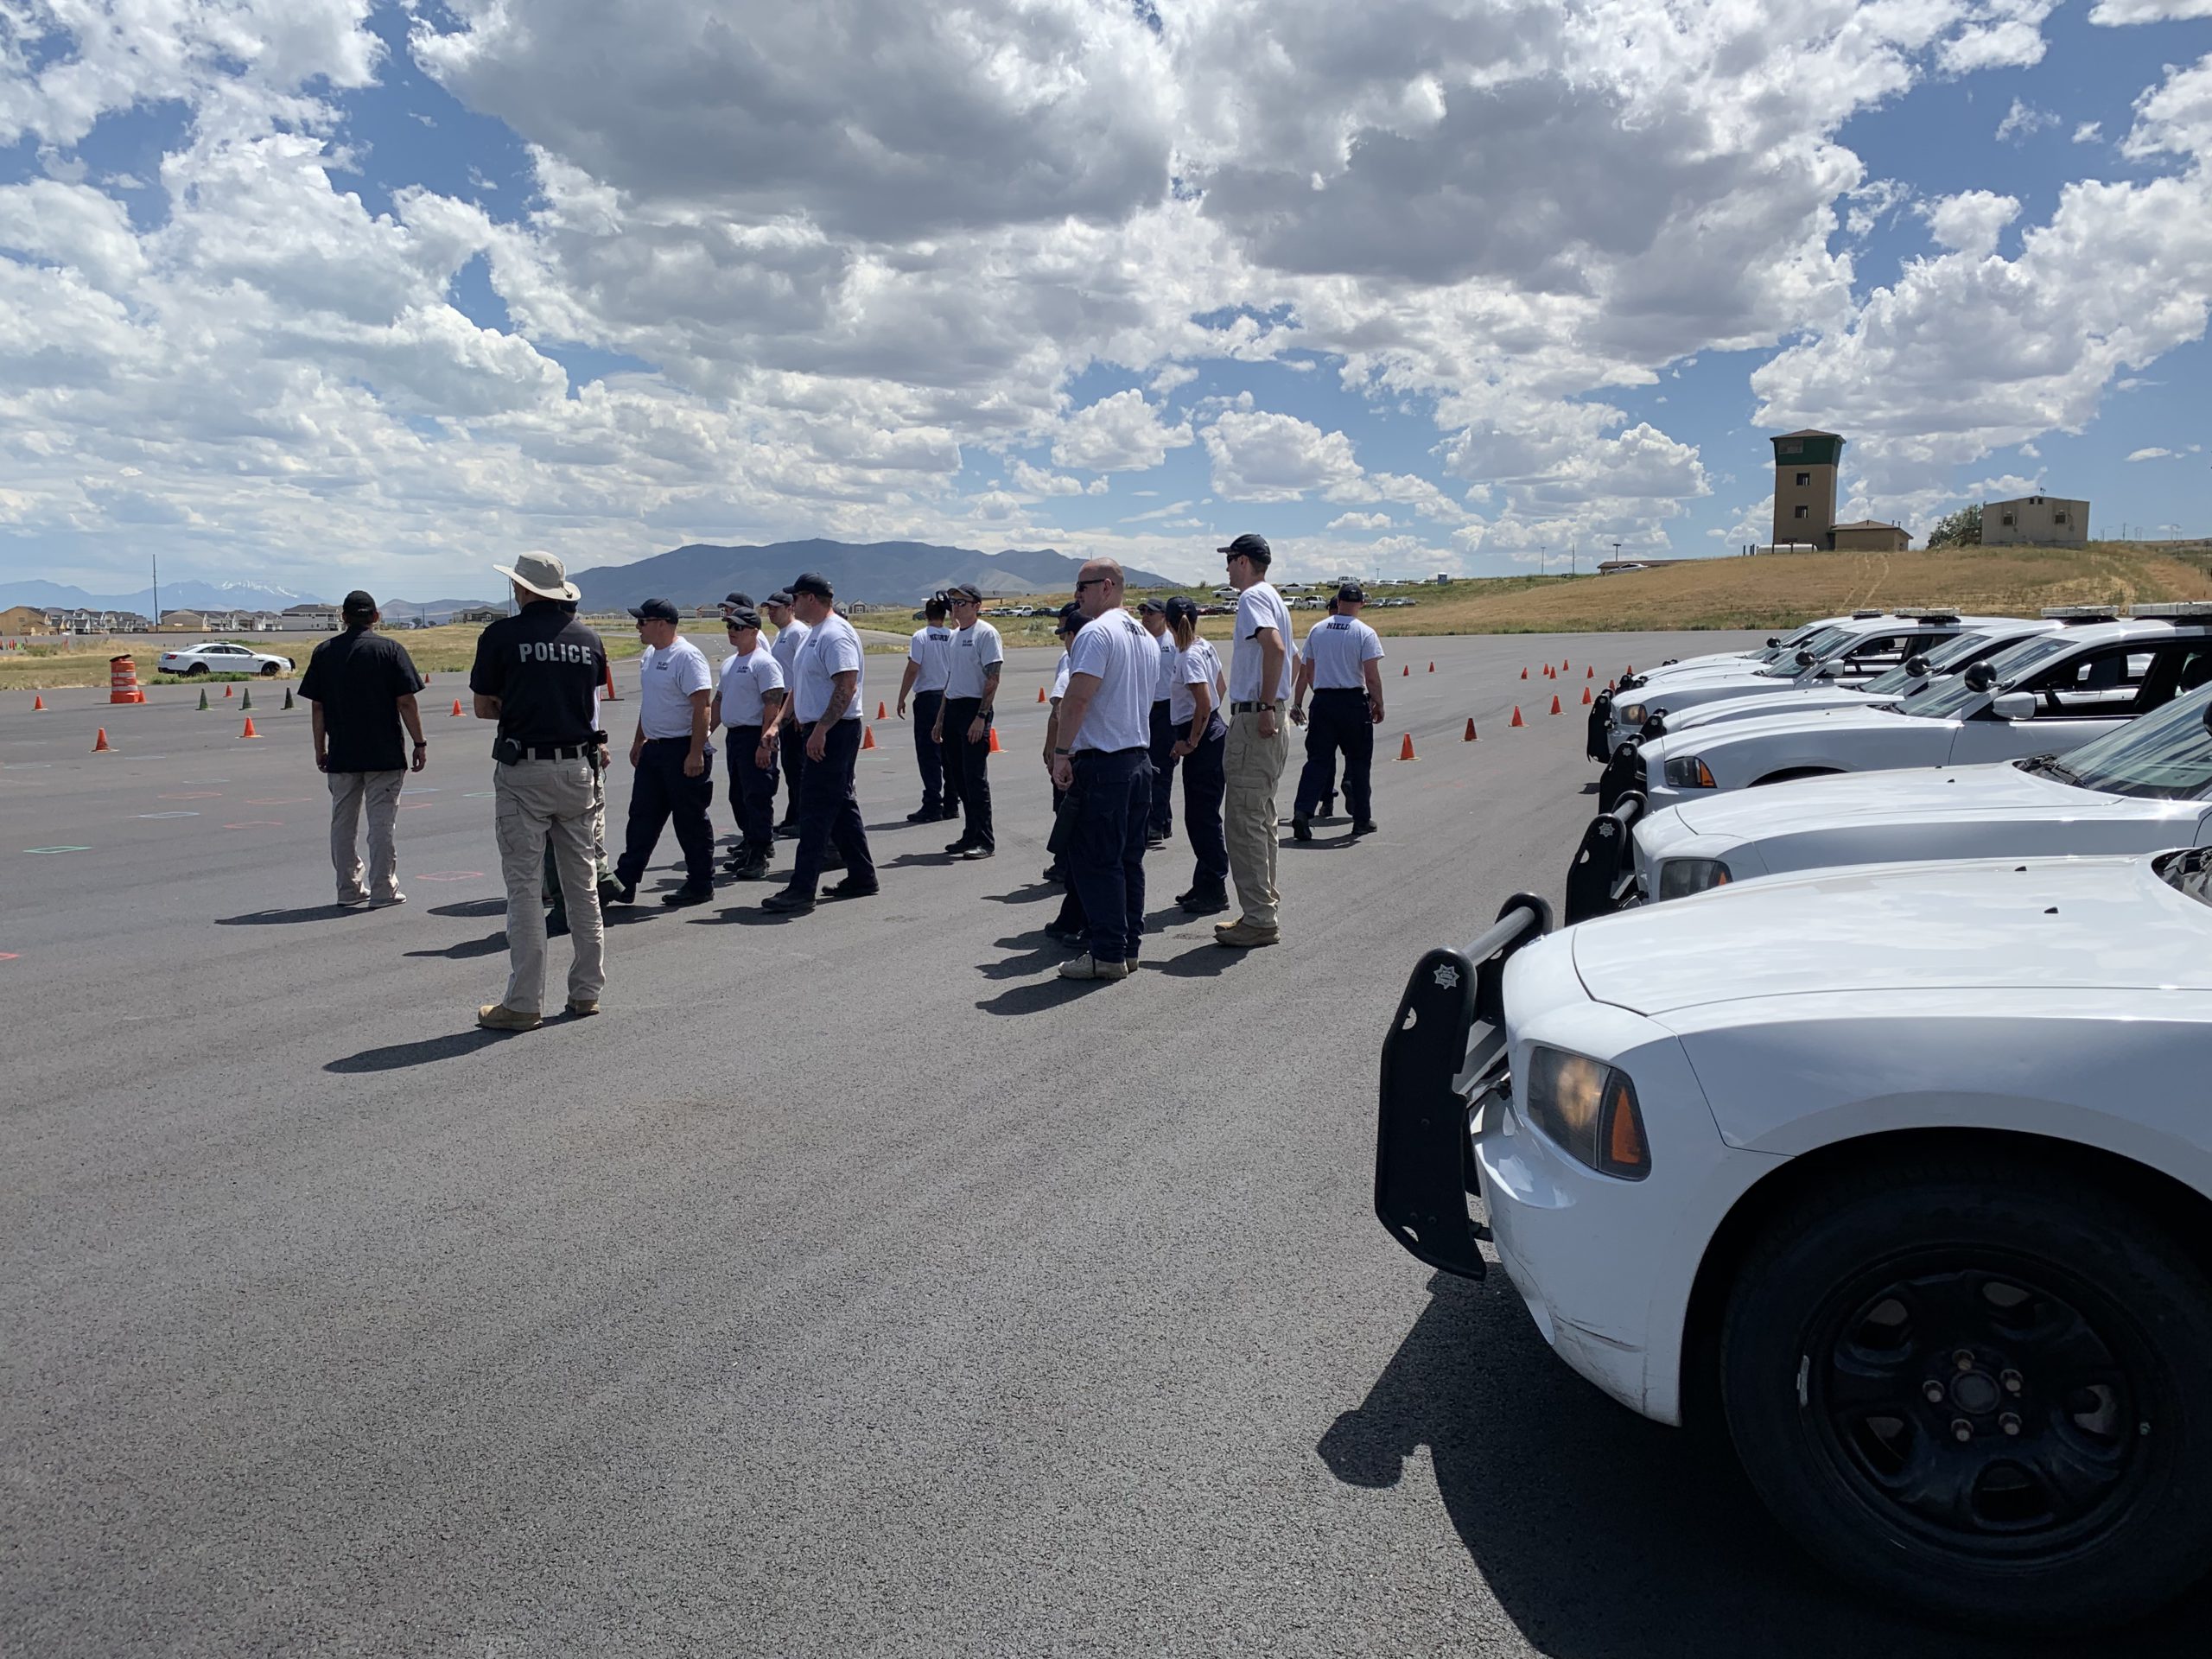 Cadets stand in a group at the EVO track with Chargers in the foreground.